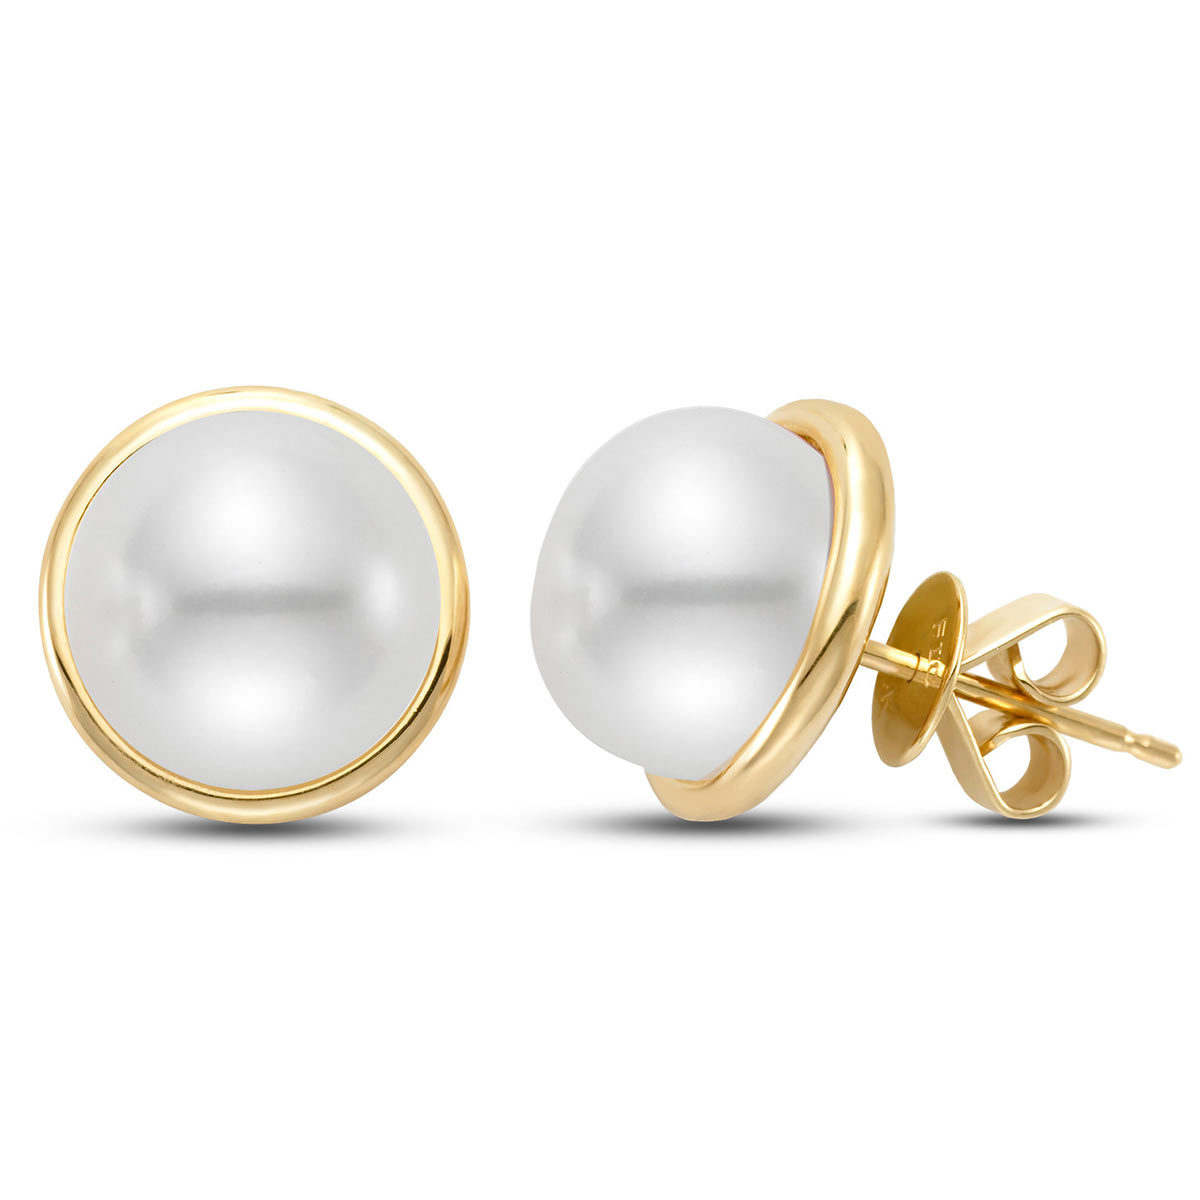 9-10mm Cultured Freshwater White Pearl Stud Earrings, 18ct Yellow Gold